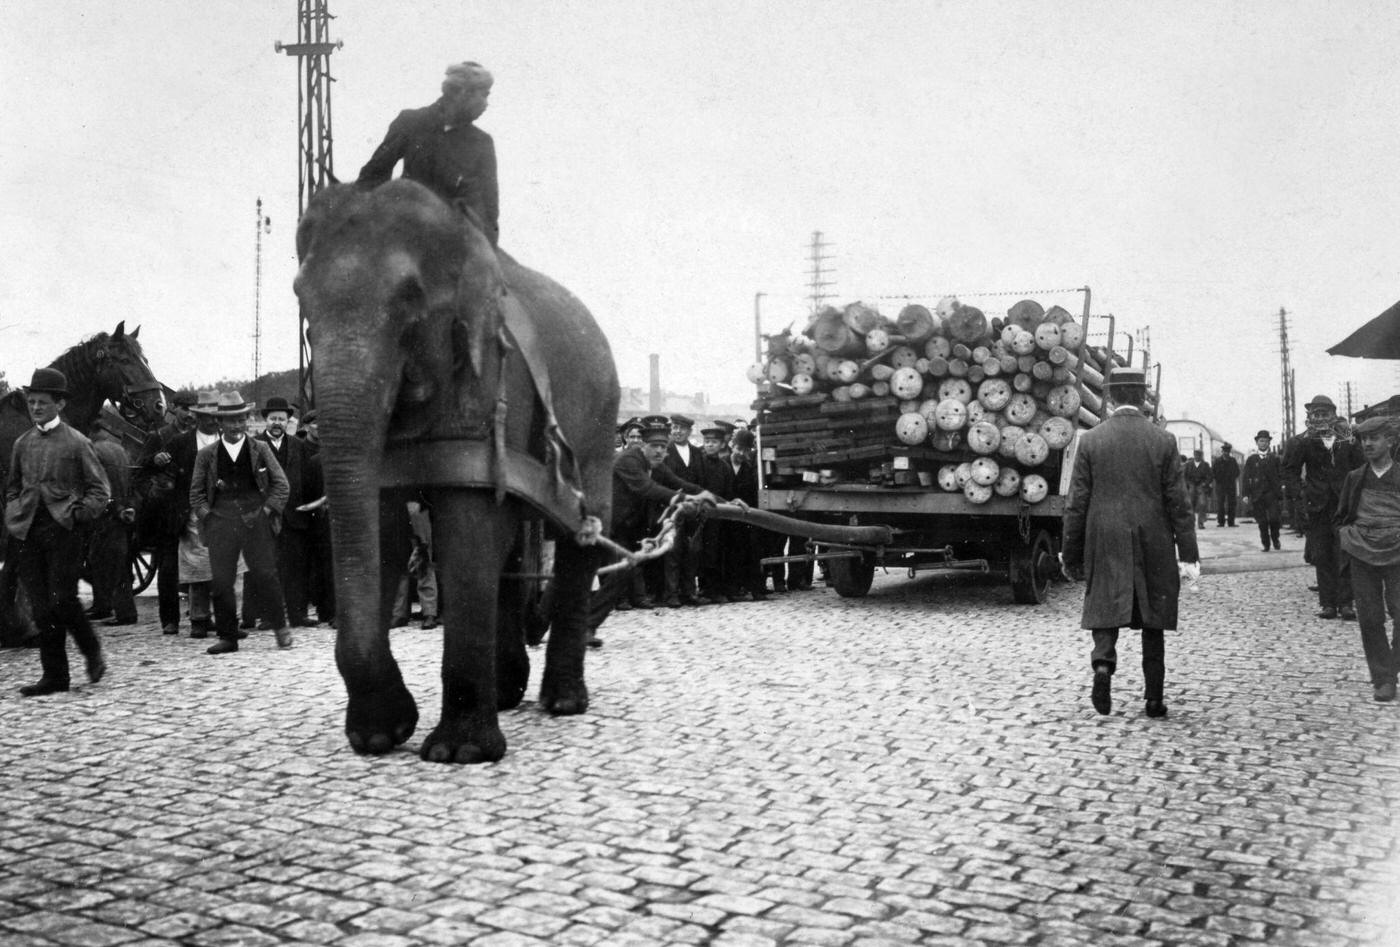 An Indian elephant hauling a heavy load in the dockland area of Hamburg, Germany, 1910